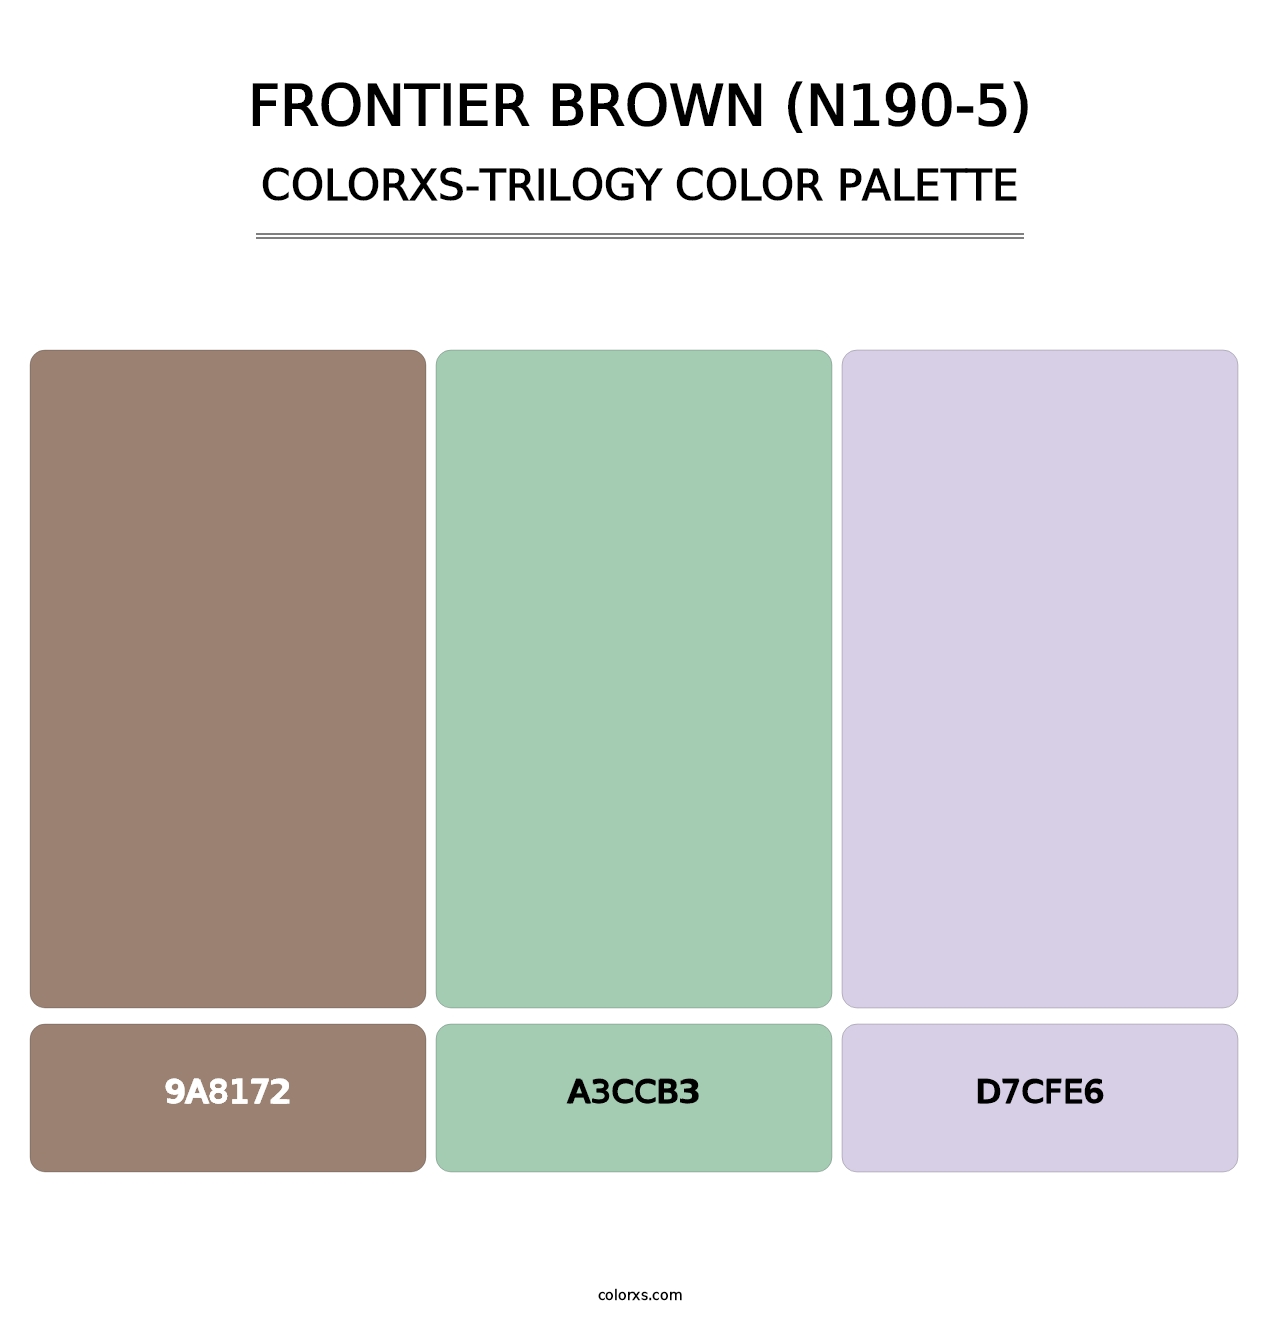 Frontier Brown (N190-5) - Colorxs Trilogy Palette